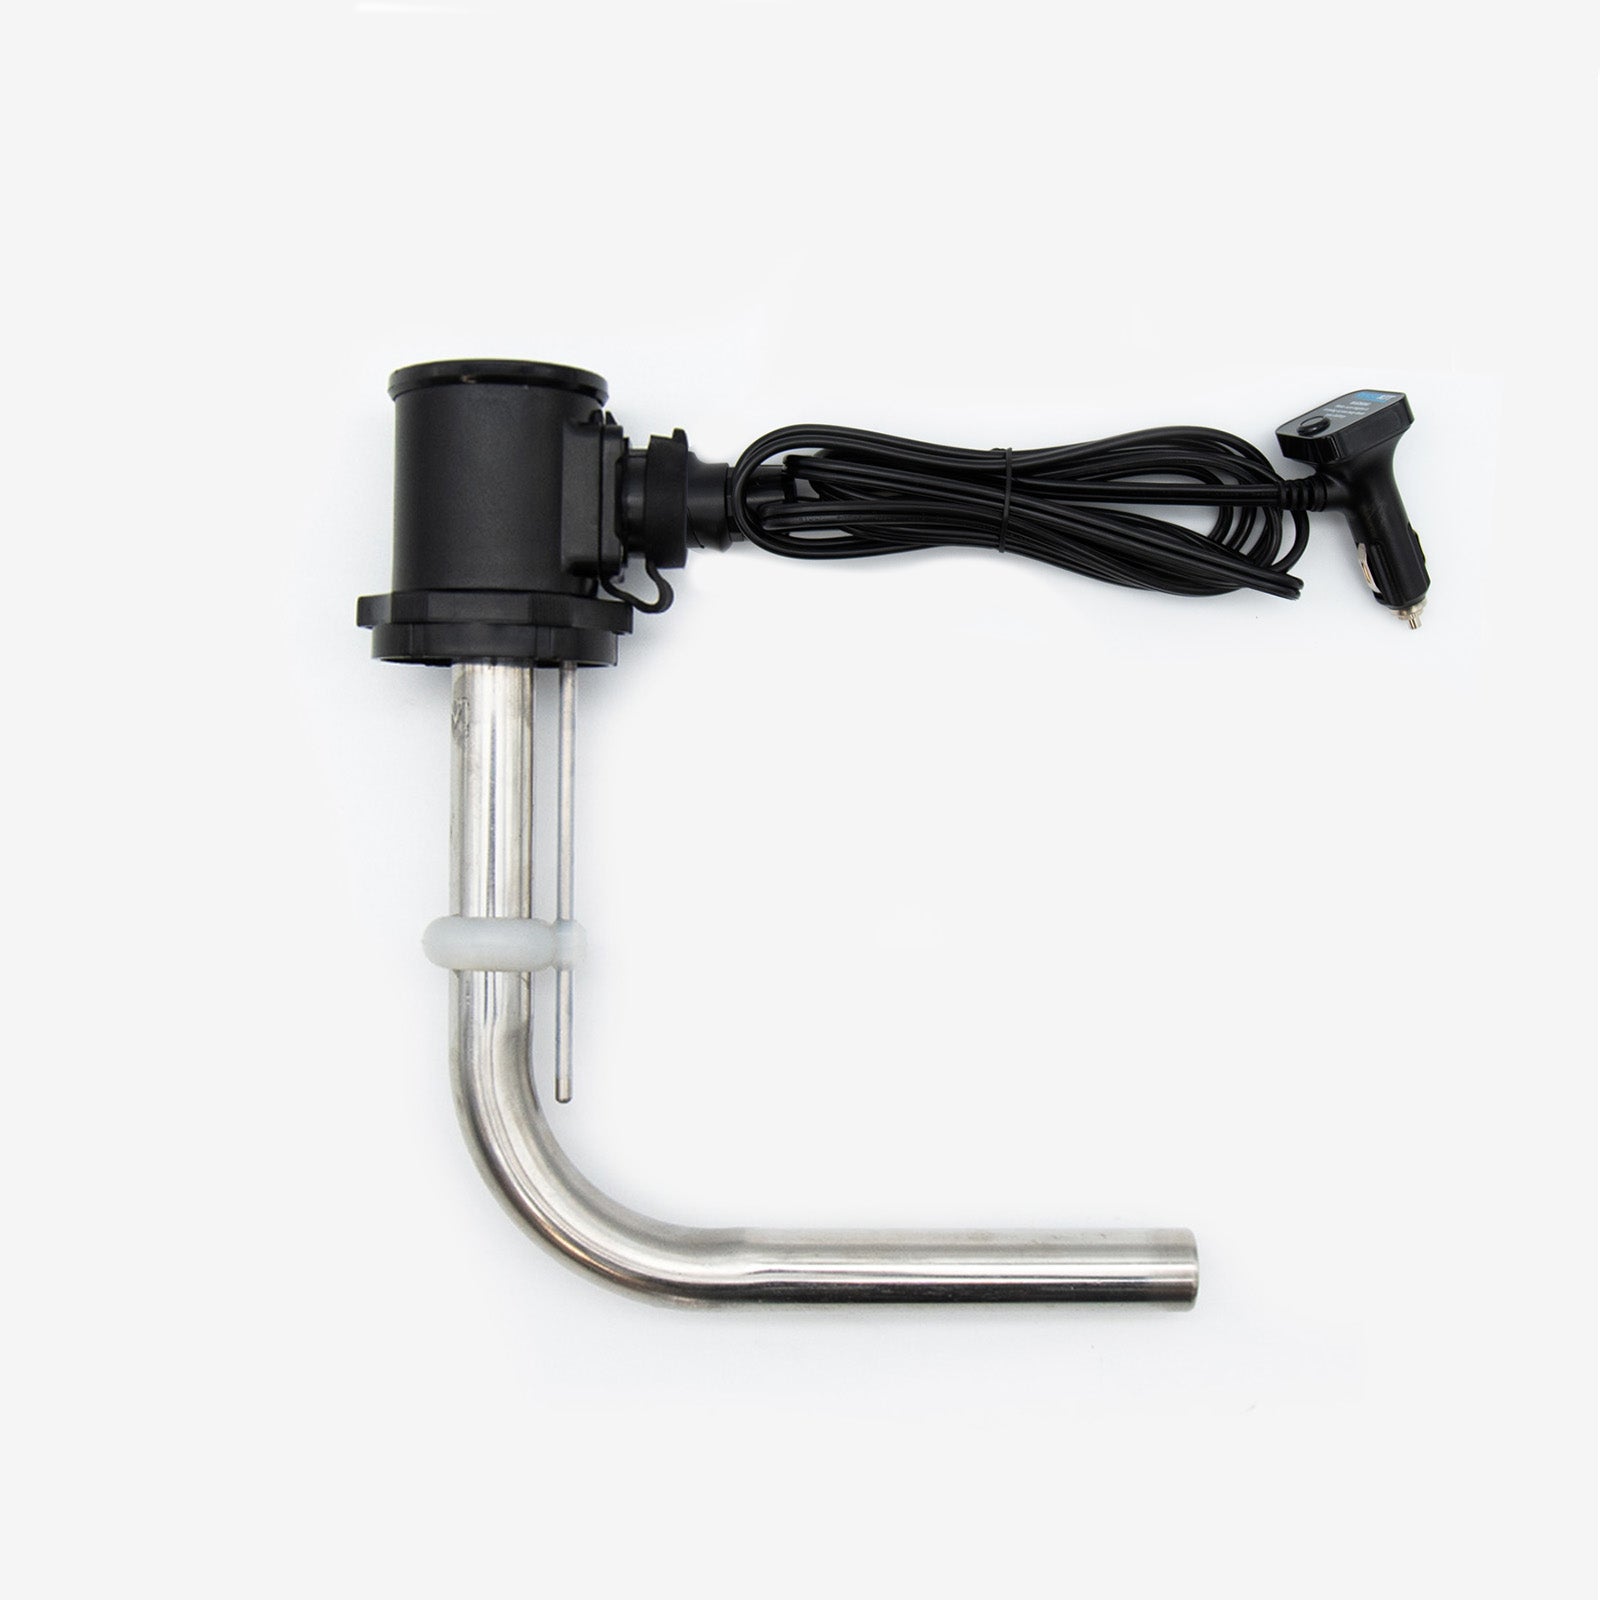 Immersion heater 3200 W, 230 V for pasteurising juice